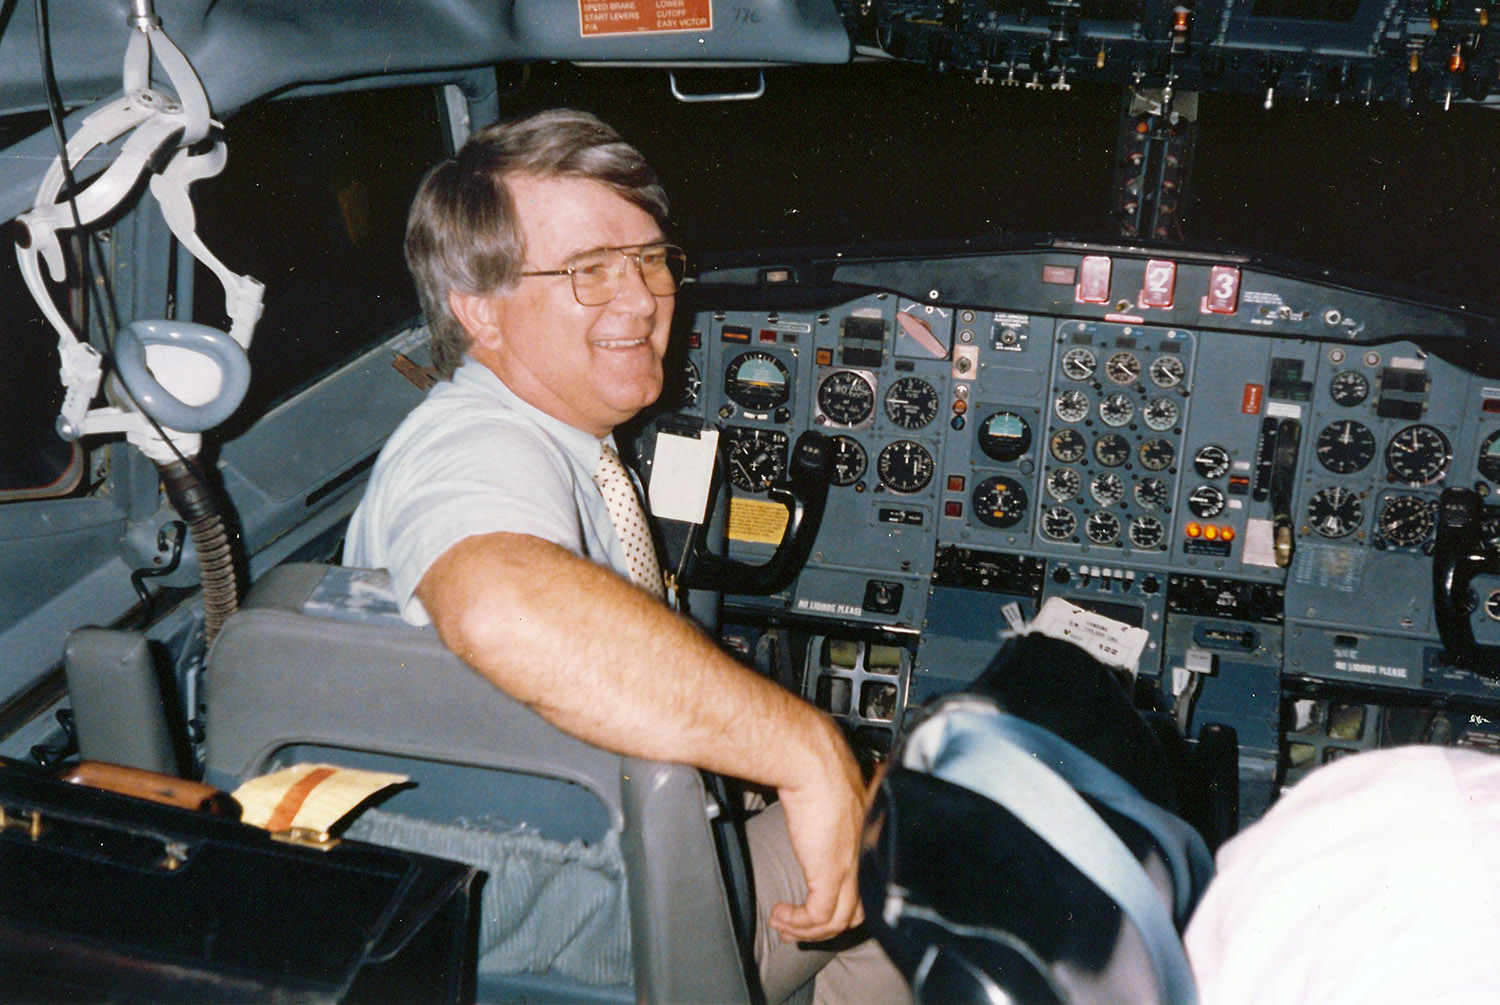 Al Spain has decades of experience in the aviation industry. He worked for several companies, including Continental Airlines, before co-founding JetBlue Airways. (Courtesy photo)